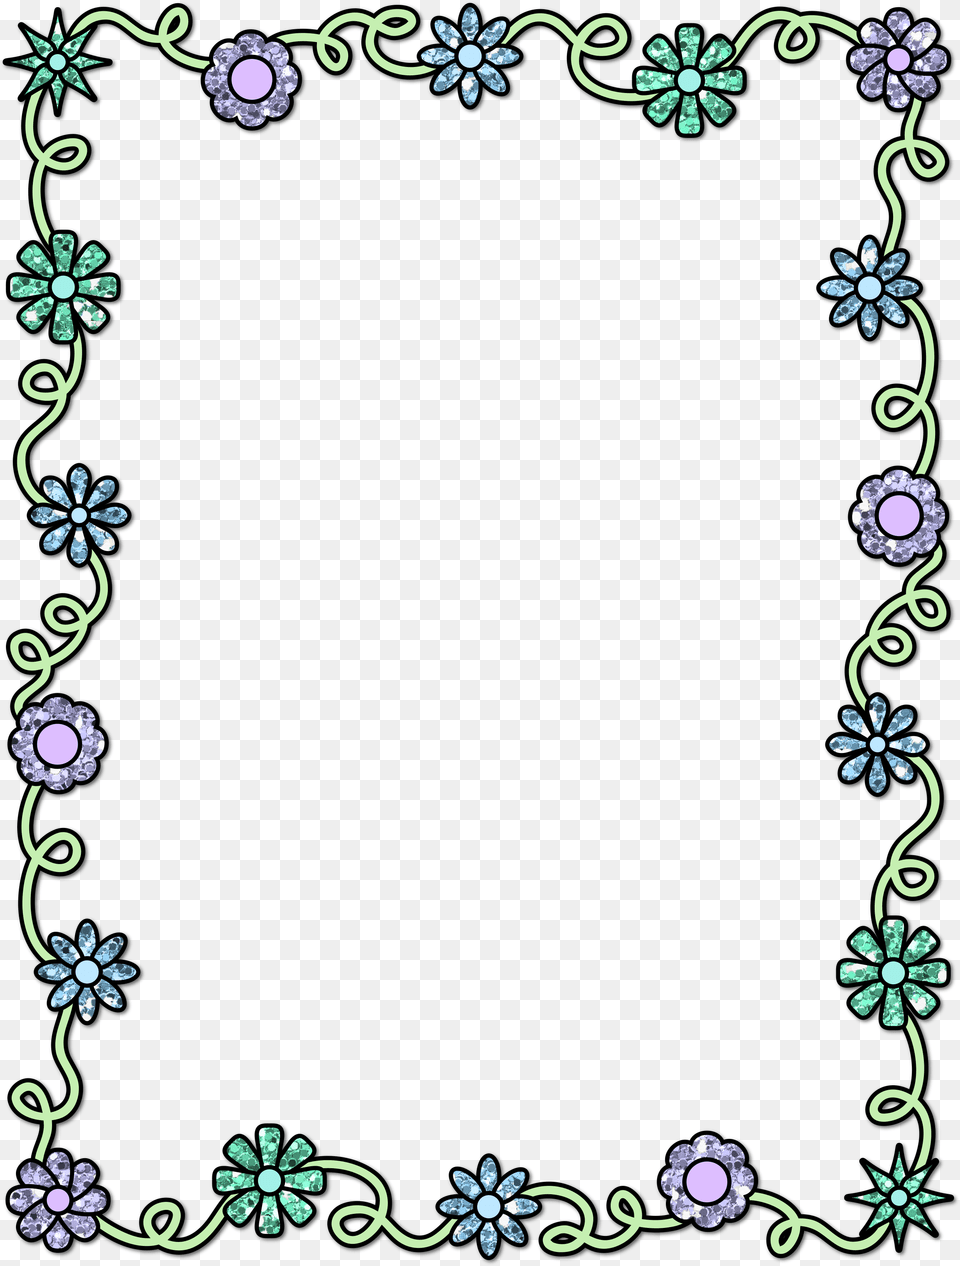 Royalty Stock Microsoft Techflourish Collections Border Flower Design Drawing, Art, Floral Design, Graphics, Home Decor Free Png Download